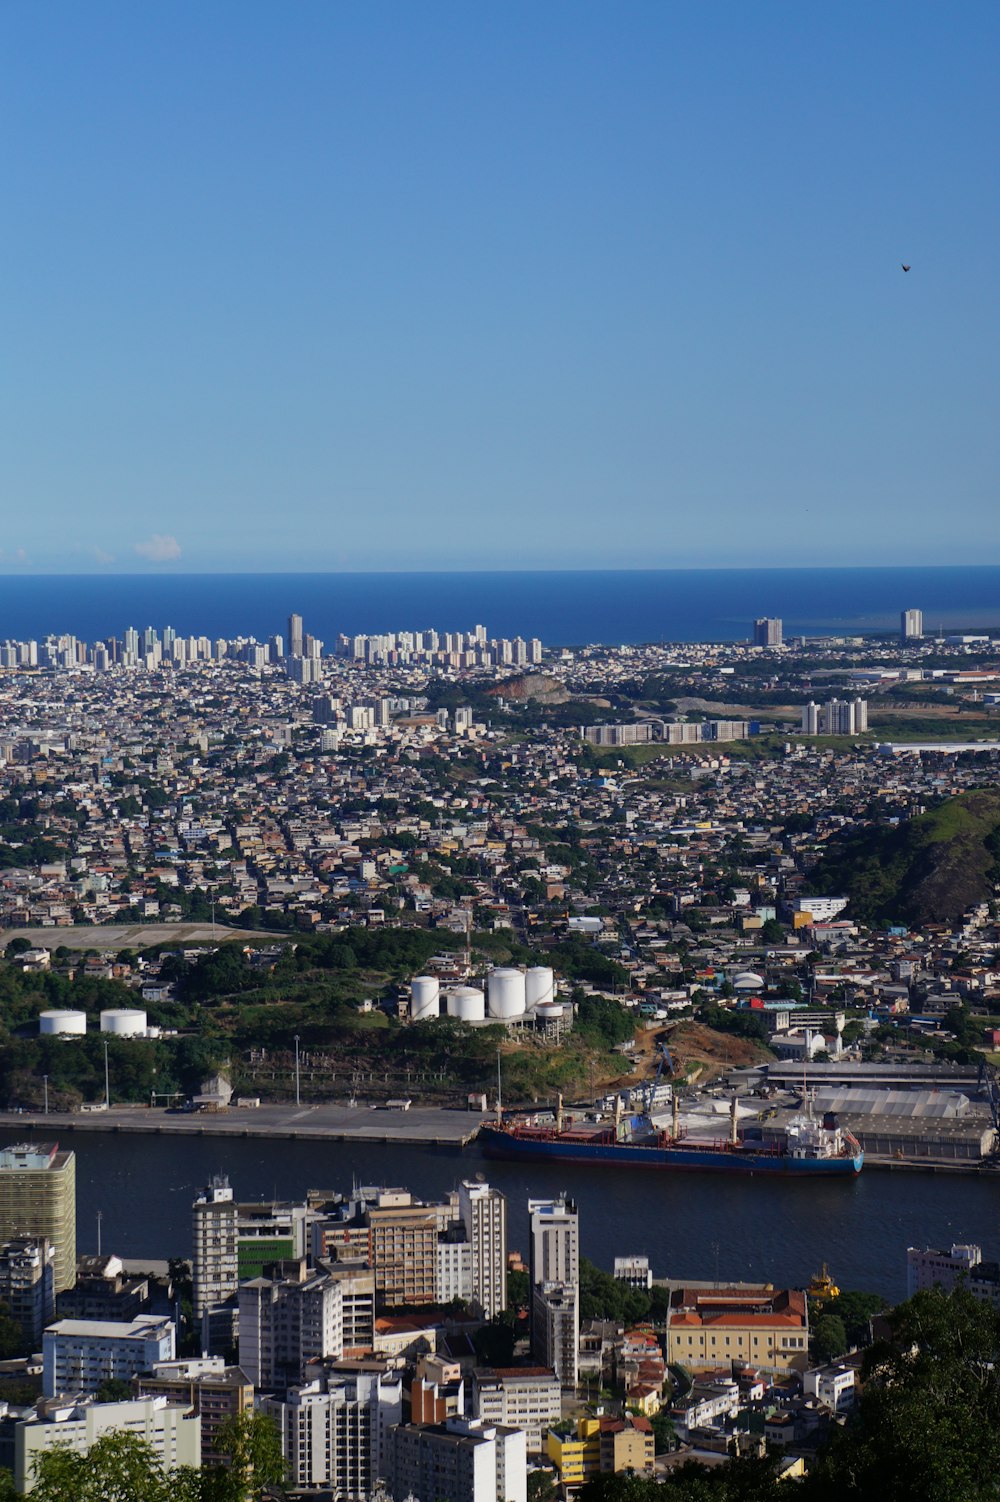 a view of a city and the ocean from a hill